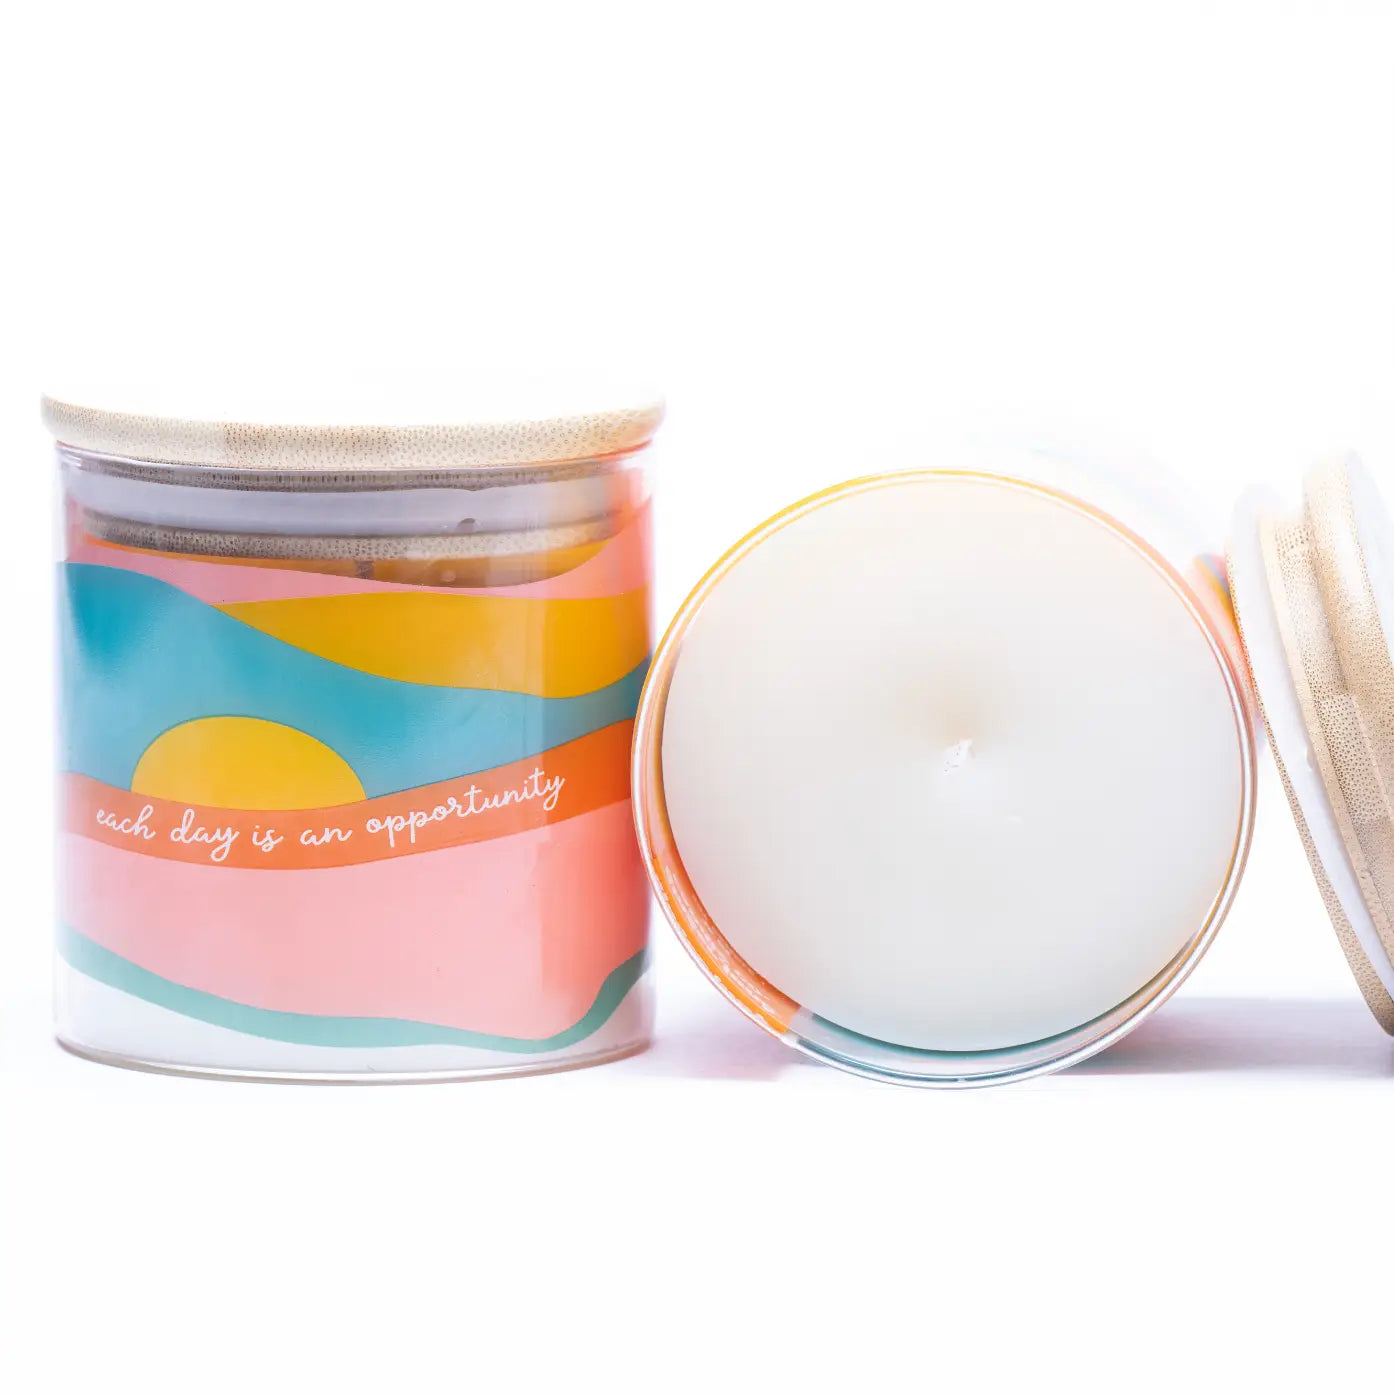 Each Day Is An Opportunity • 14 oz Candle • 100% Essential Oil Blend